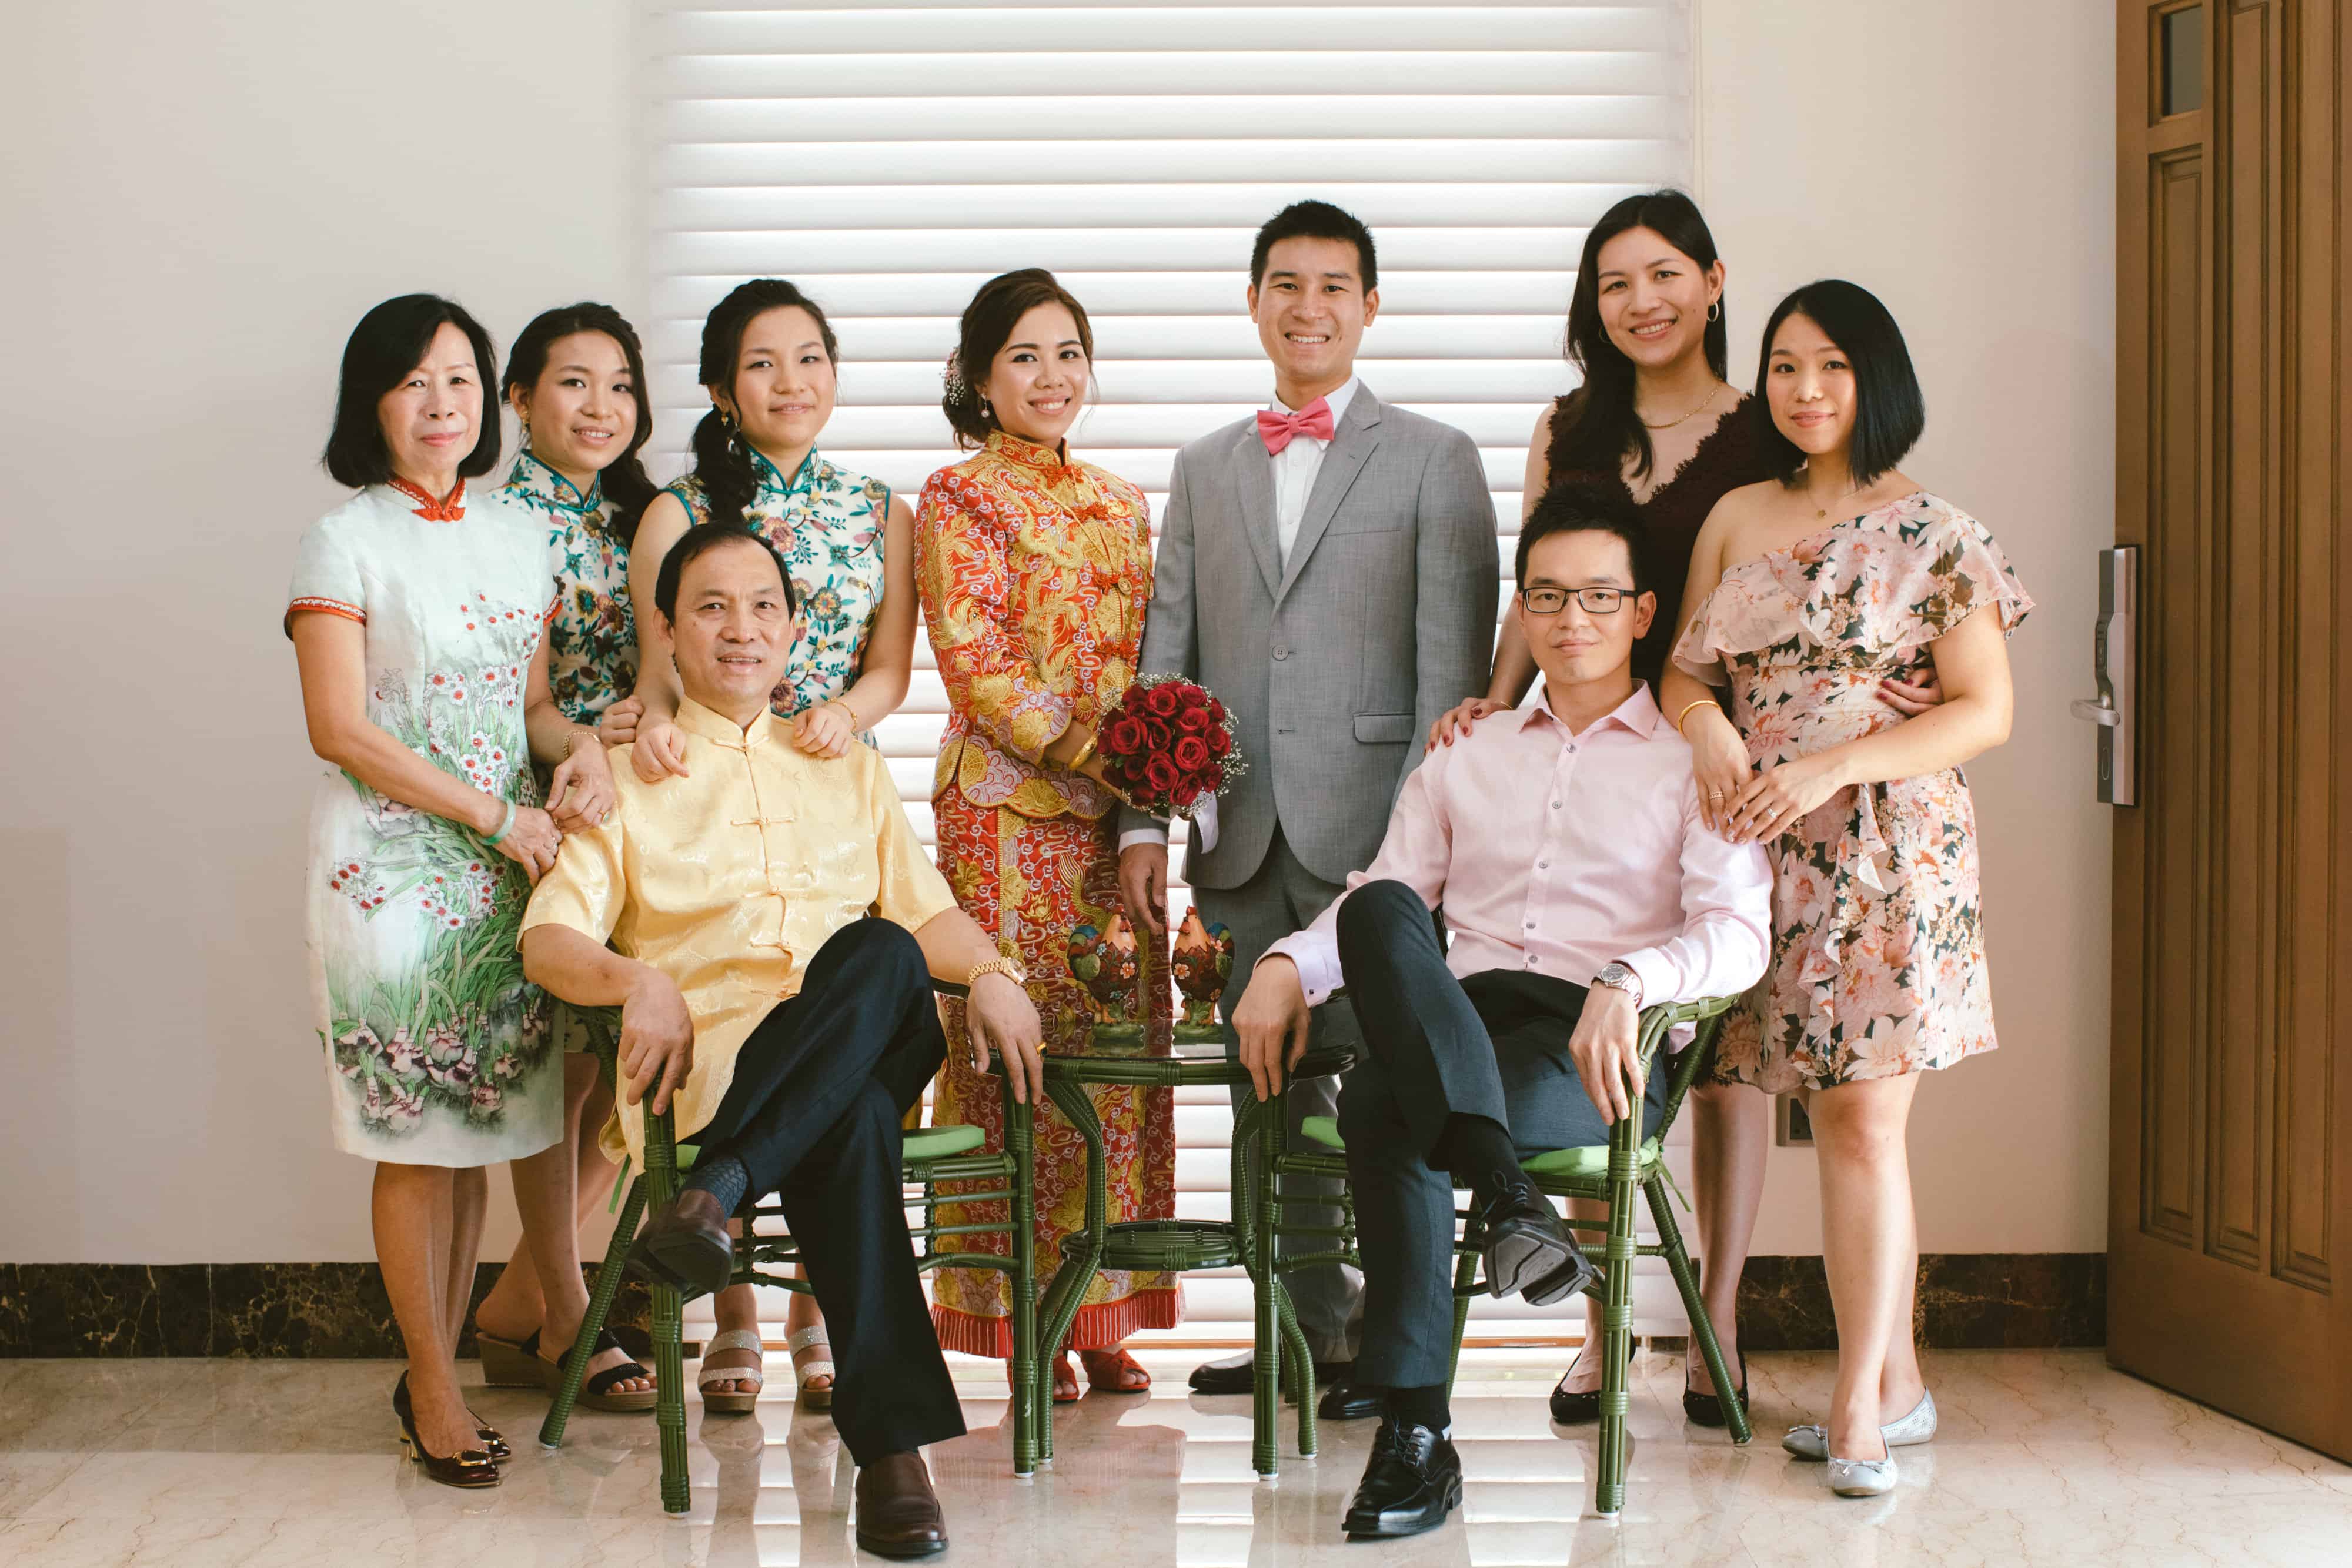 Kevin Tan Cliff Choong The Cross Effects Malaysia Destination Wedding Photographers Kuala Lumpur Actual Day in Petaling Jaya Malaysia Destination Wedding Photographer Cliff Choong Photography Chinese Tea Ceremony Family Portrait